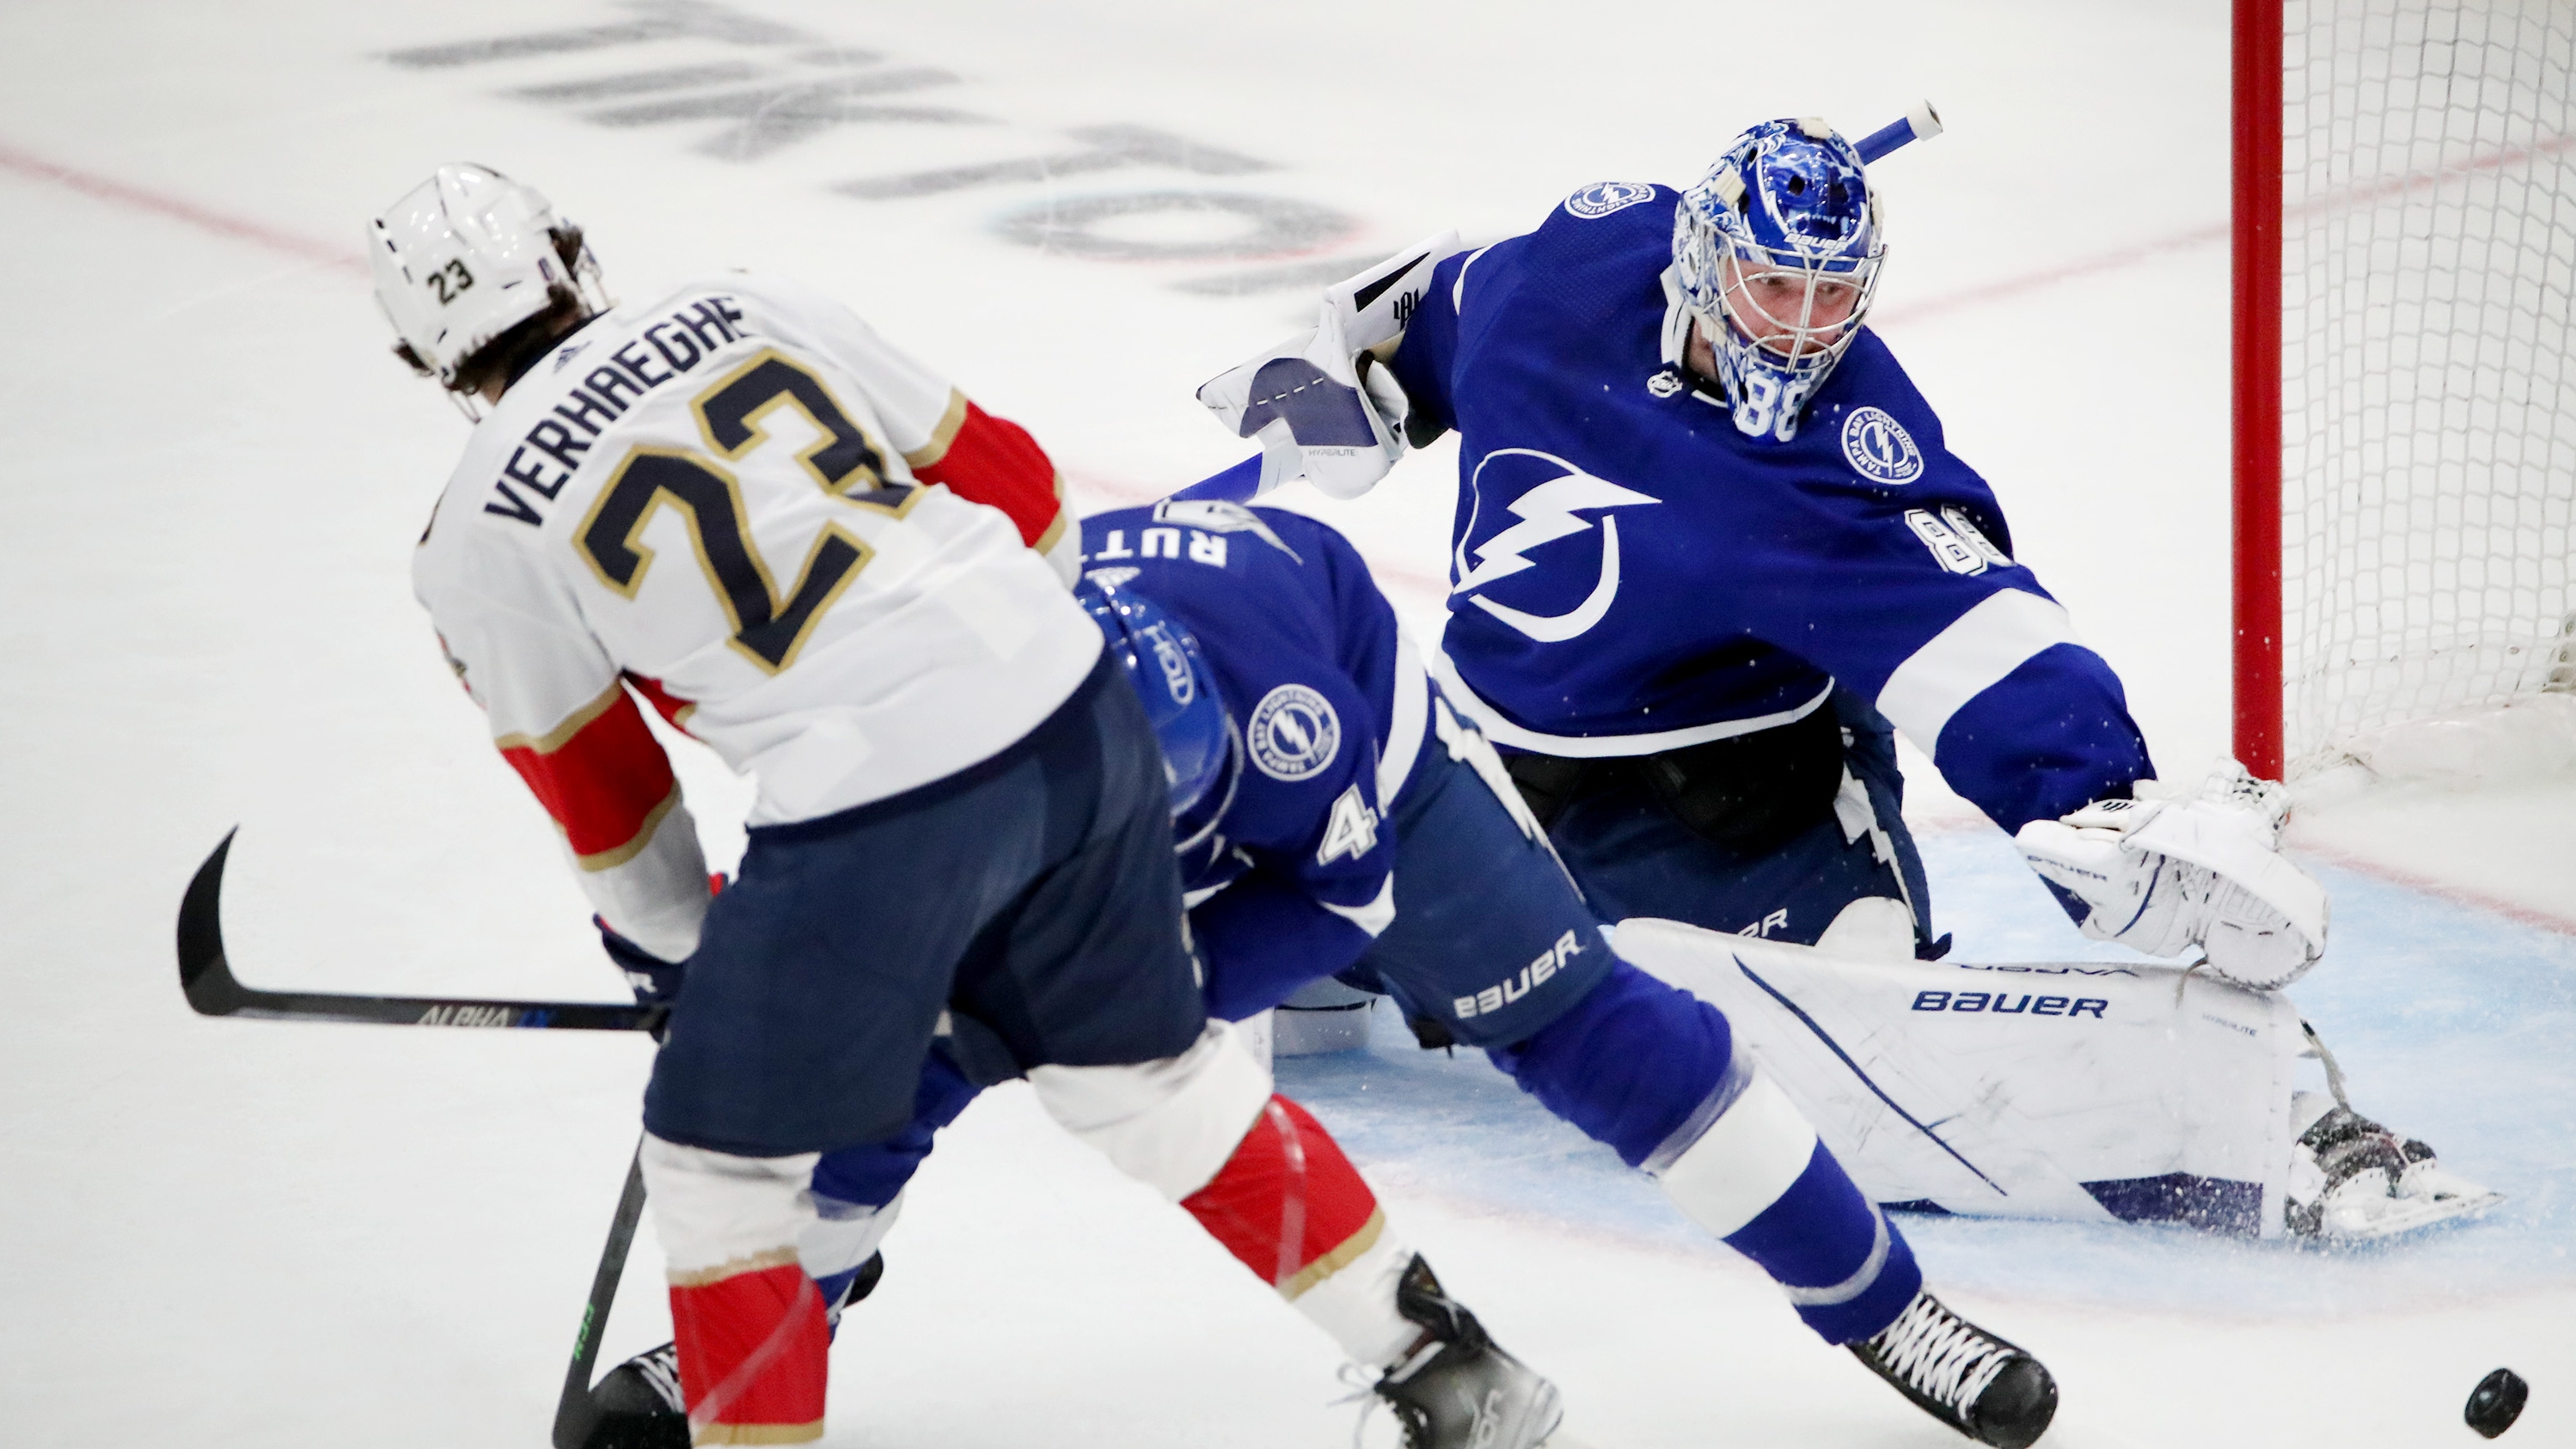 Tampa Bay Lightning announce official pre-season schedule - That's